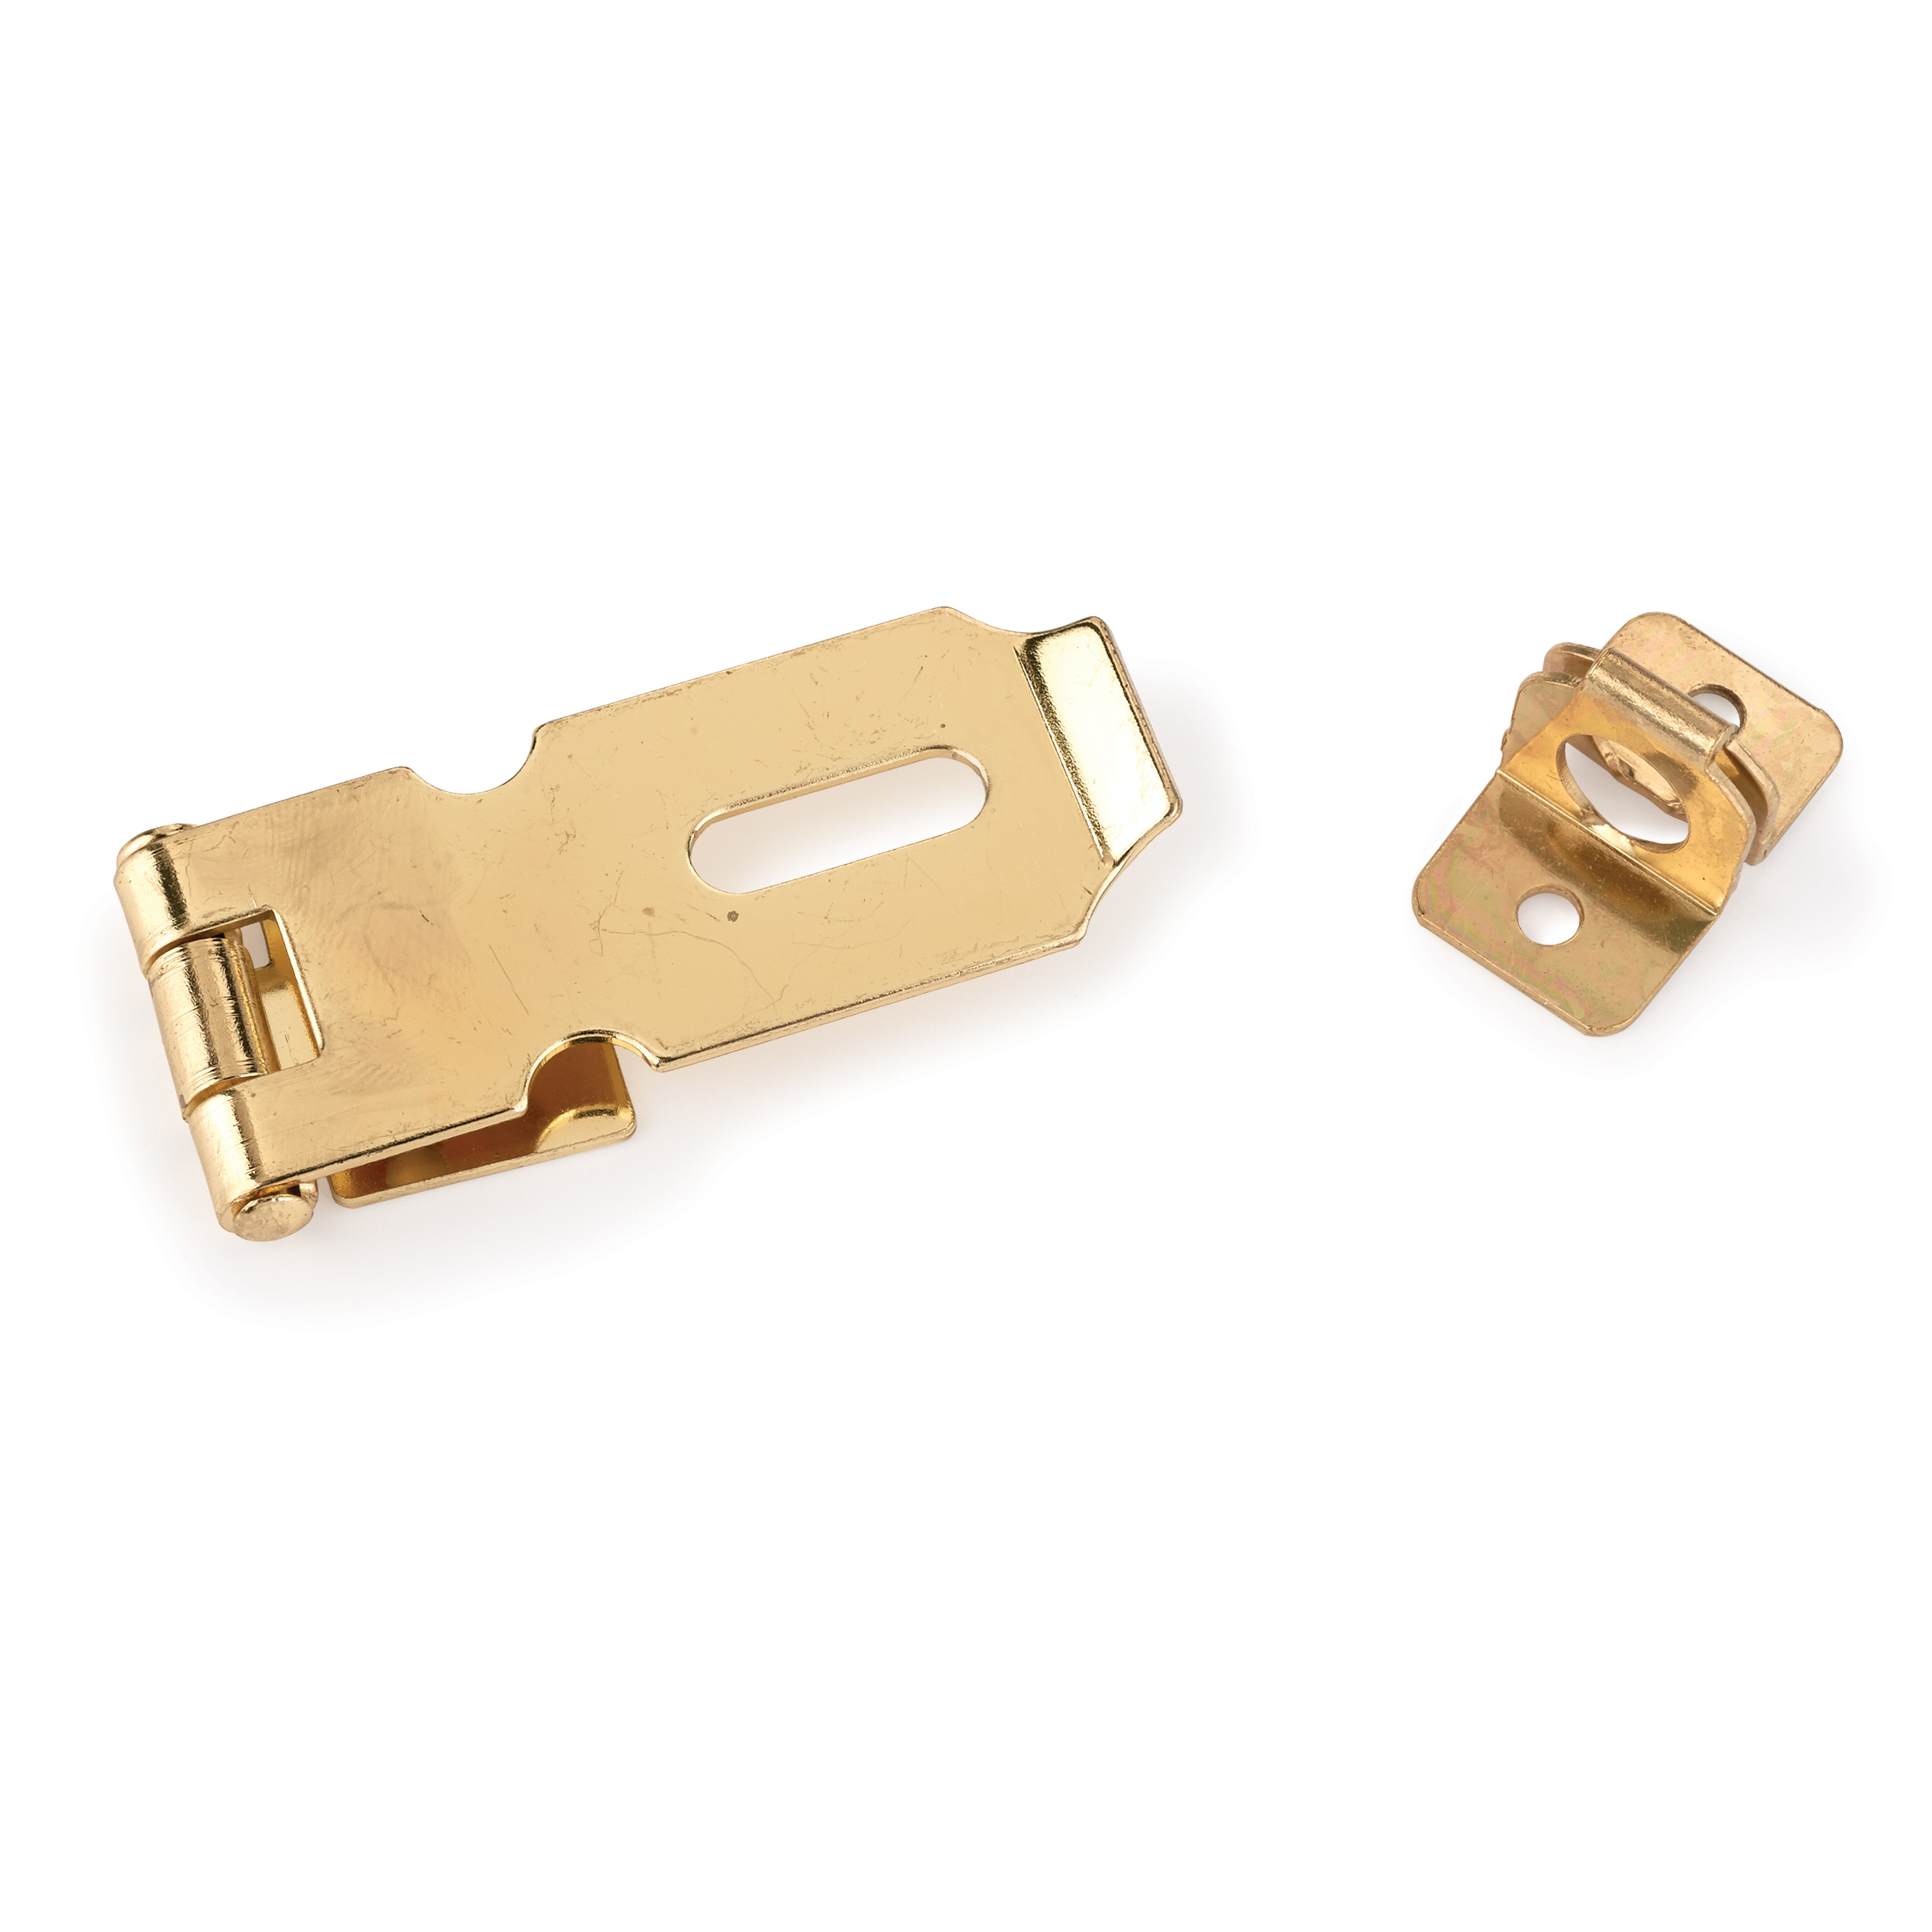 Chest Hasp Polished Brass Plated 1-piece With Screws